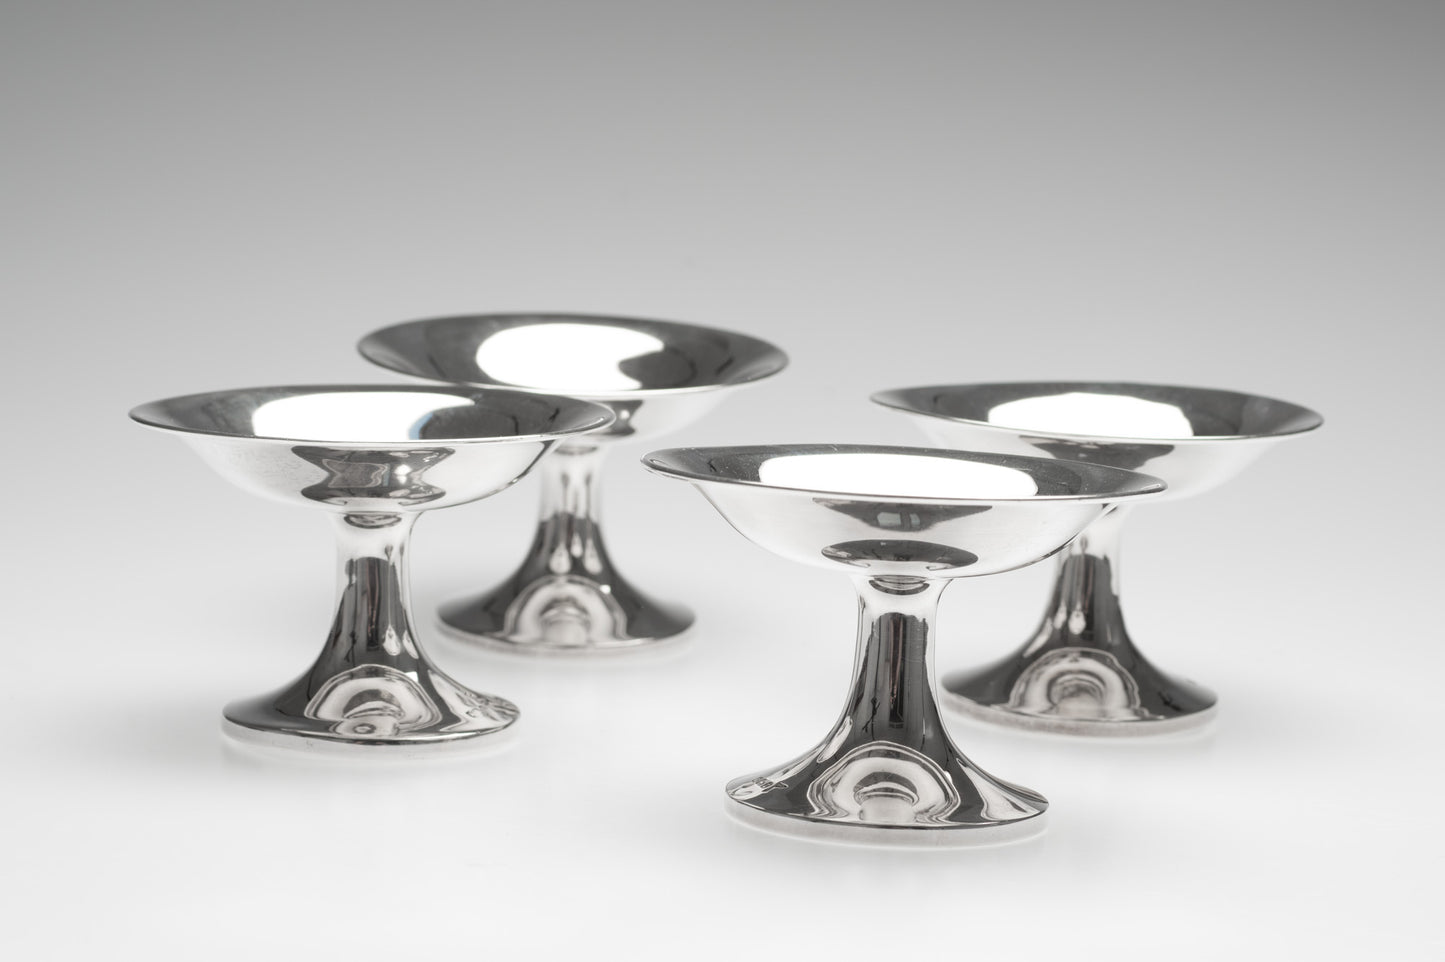 Set of 4 Antique Walker & Hall Solid Silver Sweetmeat or Bonbon Dishes / Tazza (Code 2708)